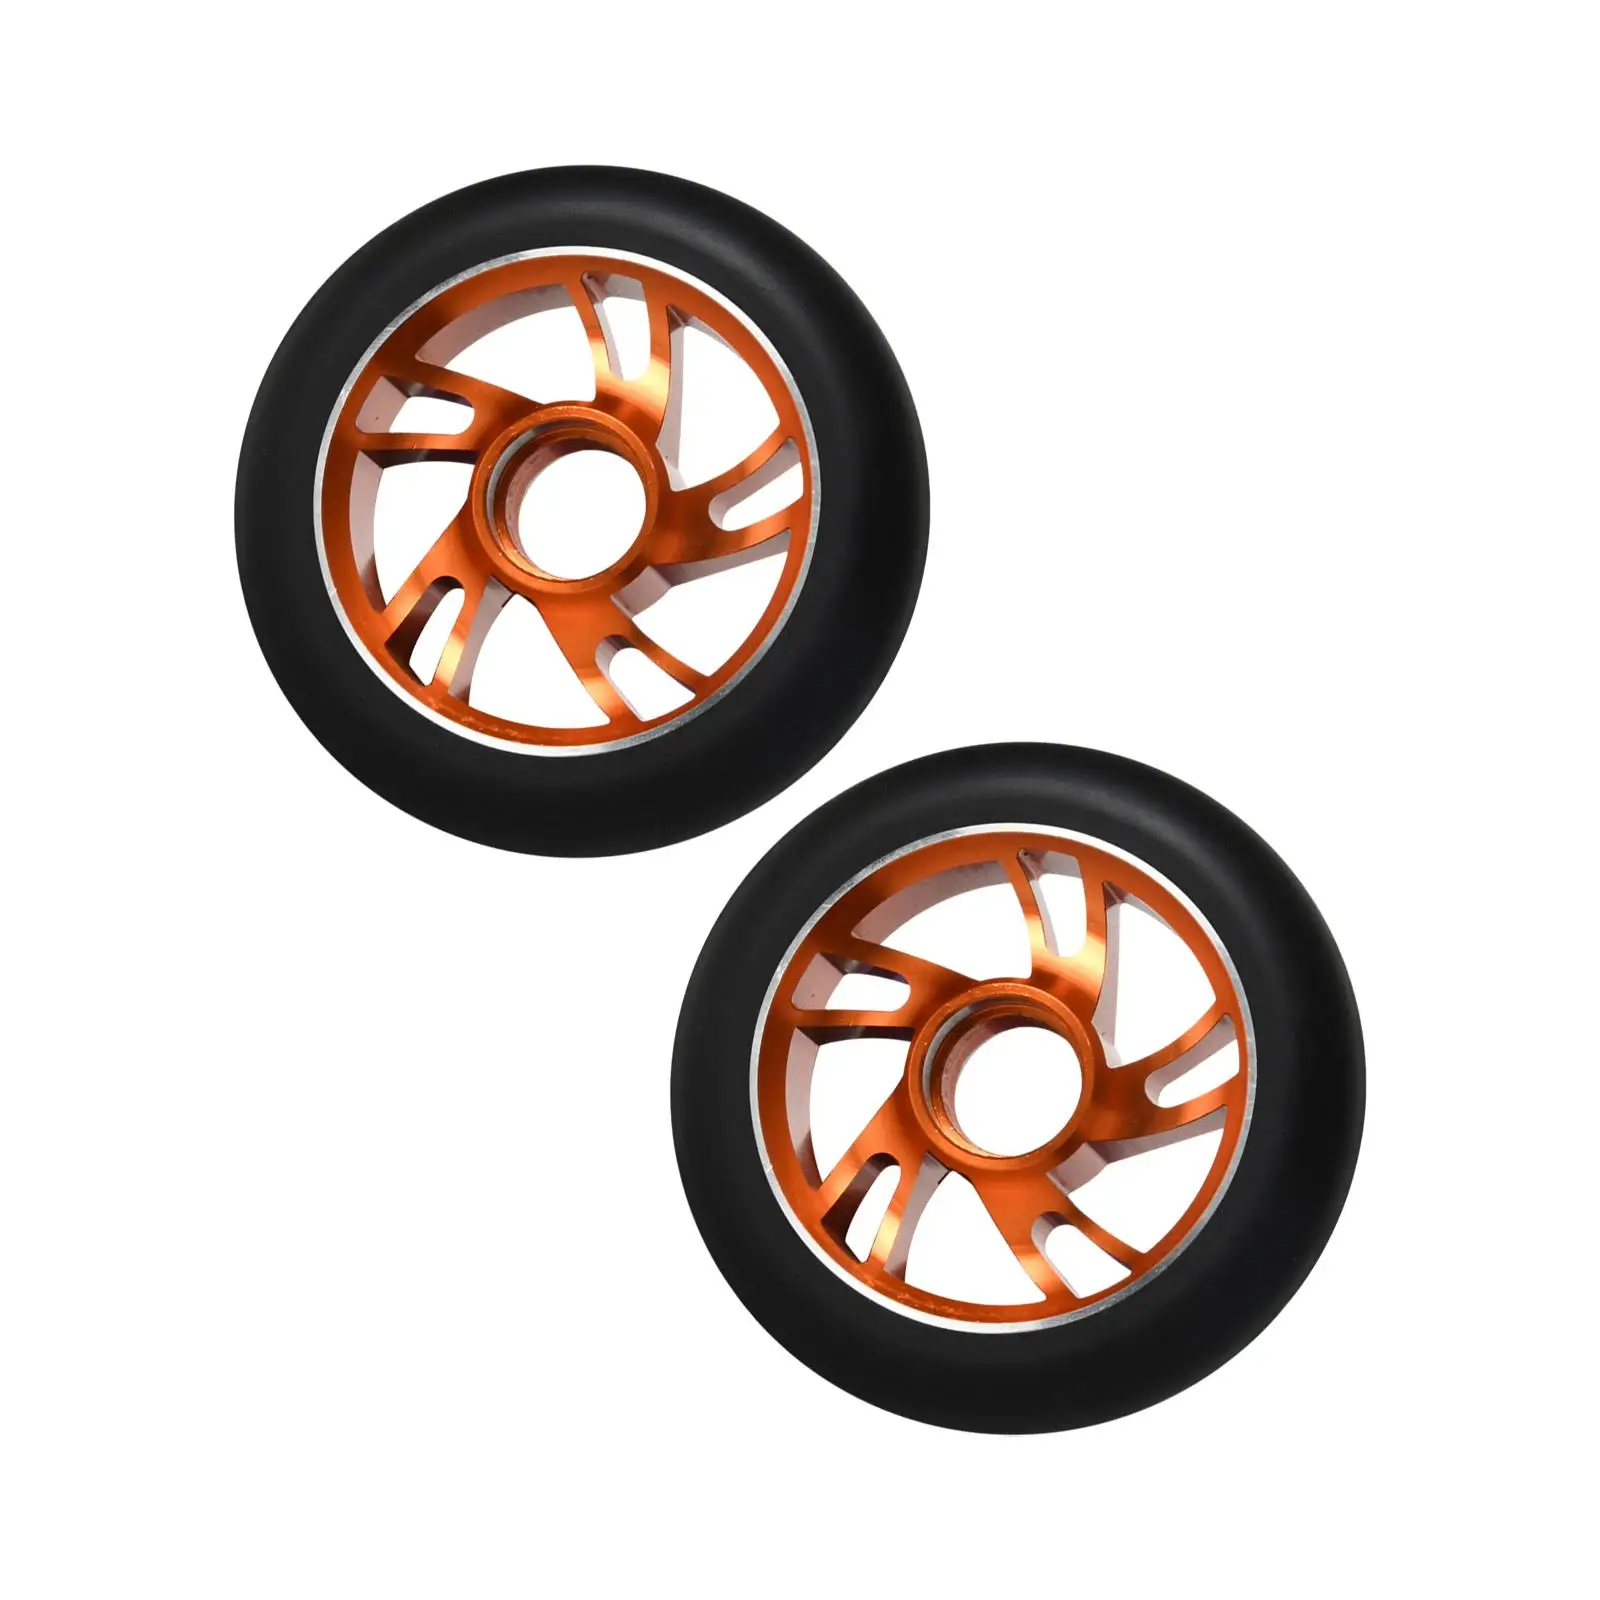 2x Scooter Replacement Wheels Spare Parts Wear Resistant Professional 100mm